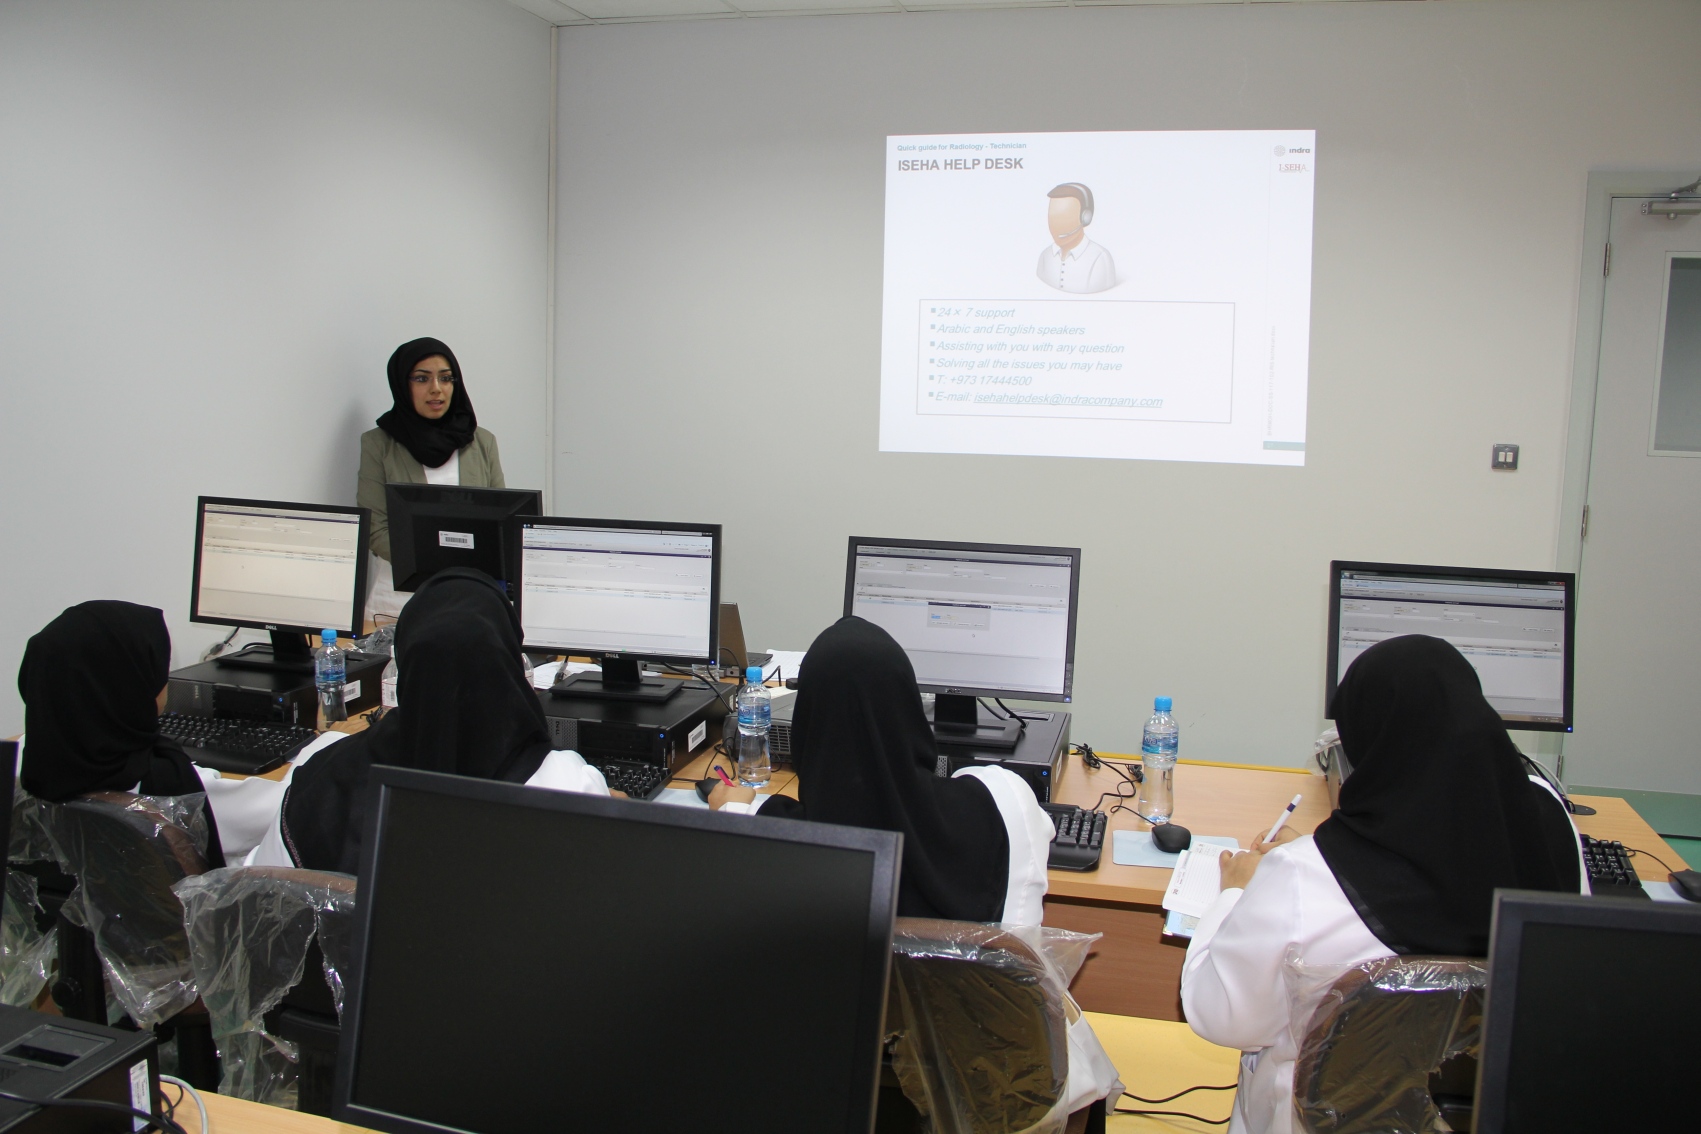 In the context of the launch of the first phase of the National Health Information System (I-Seha) in health centers: Training on the National Health Information System started for the staff working at BBK Hidd Health Center 